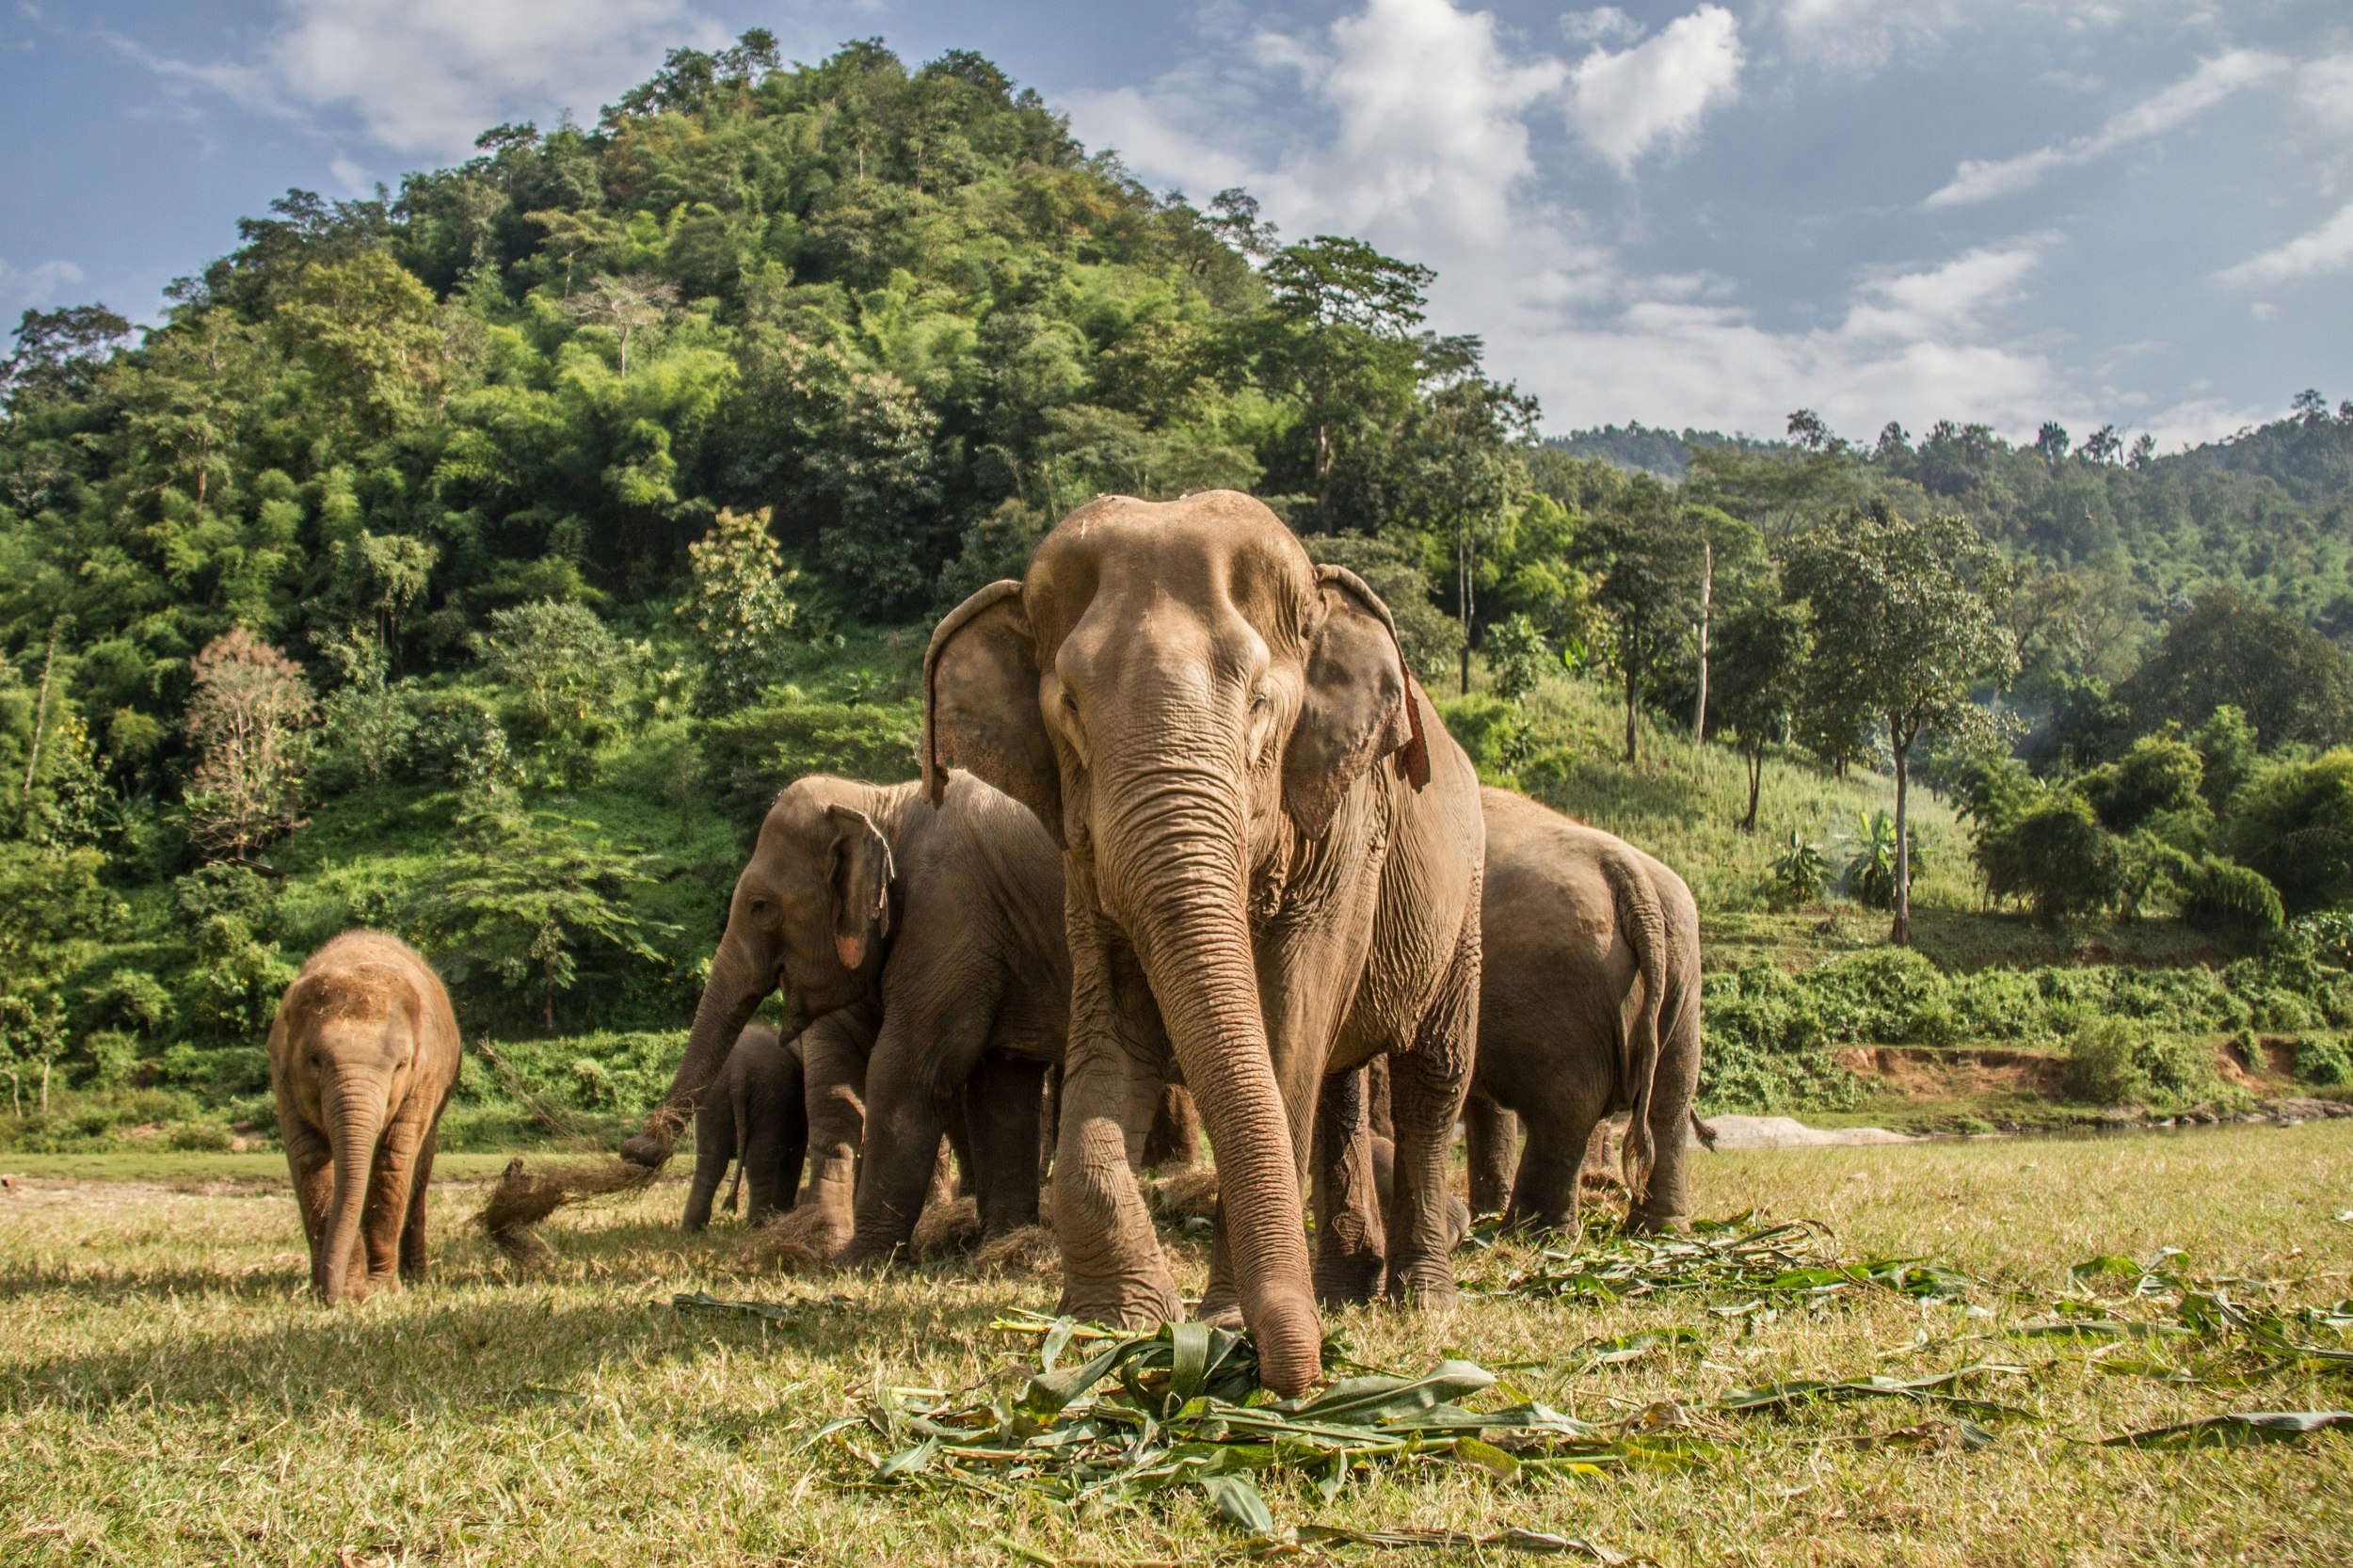 A herd of elephants in a jungle setting. One is facing the camera and appears to be approaching